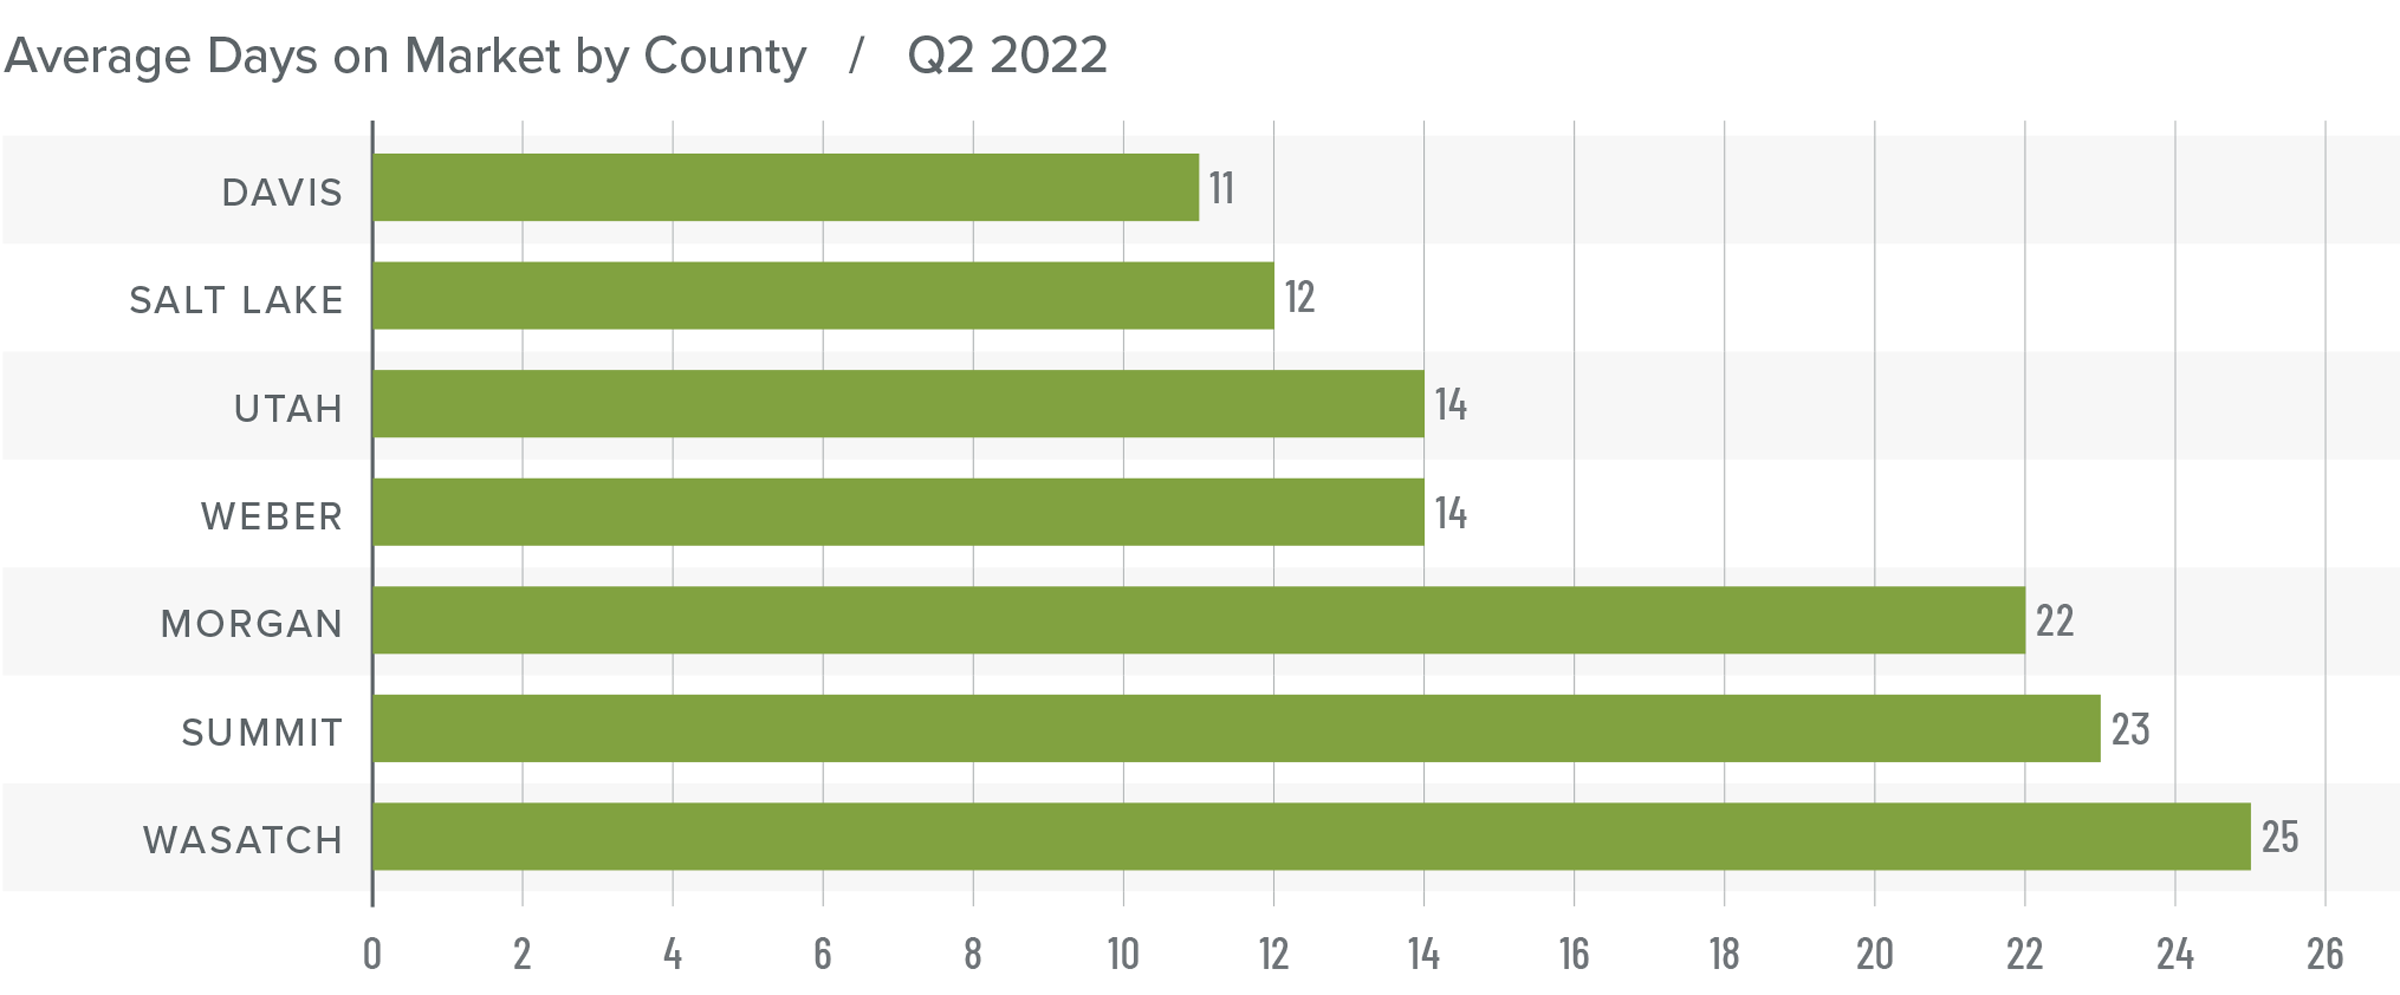 A bar graph showing the average days on market for homes in various counties in Utah for Q2 2022. Davis County has the lowest DOM at 11, followed by Salt Lake at 12, Utah and Weber at 14, Morgan at 22, Summit at 23, and Wasatch at 25.